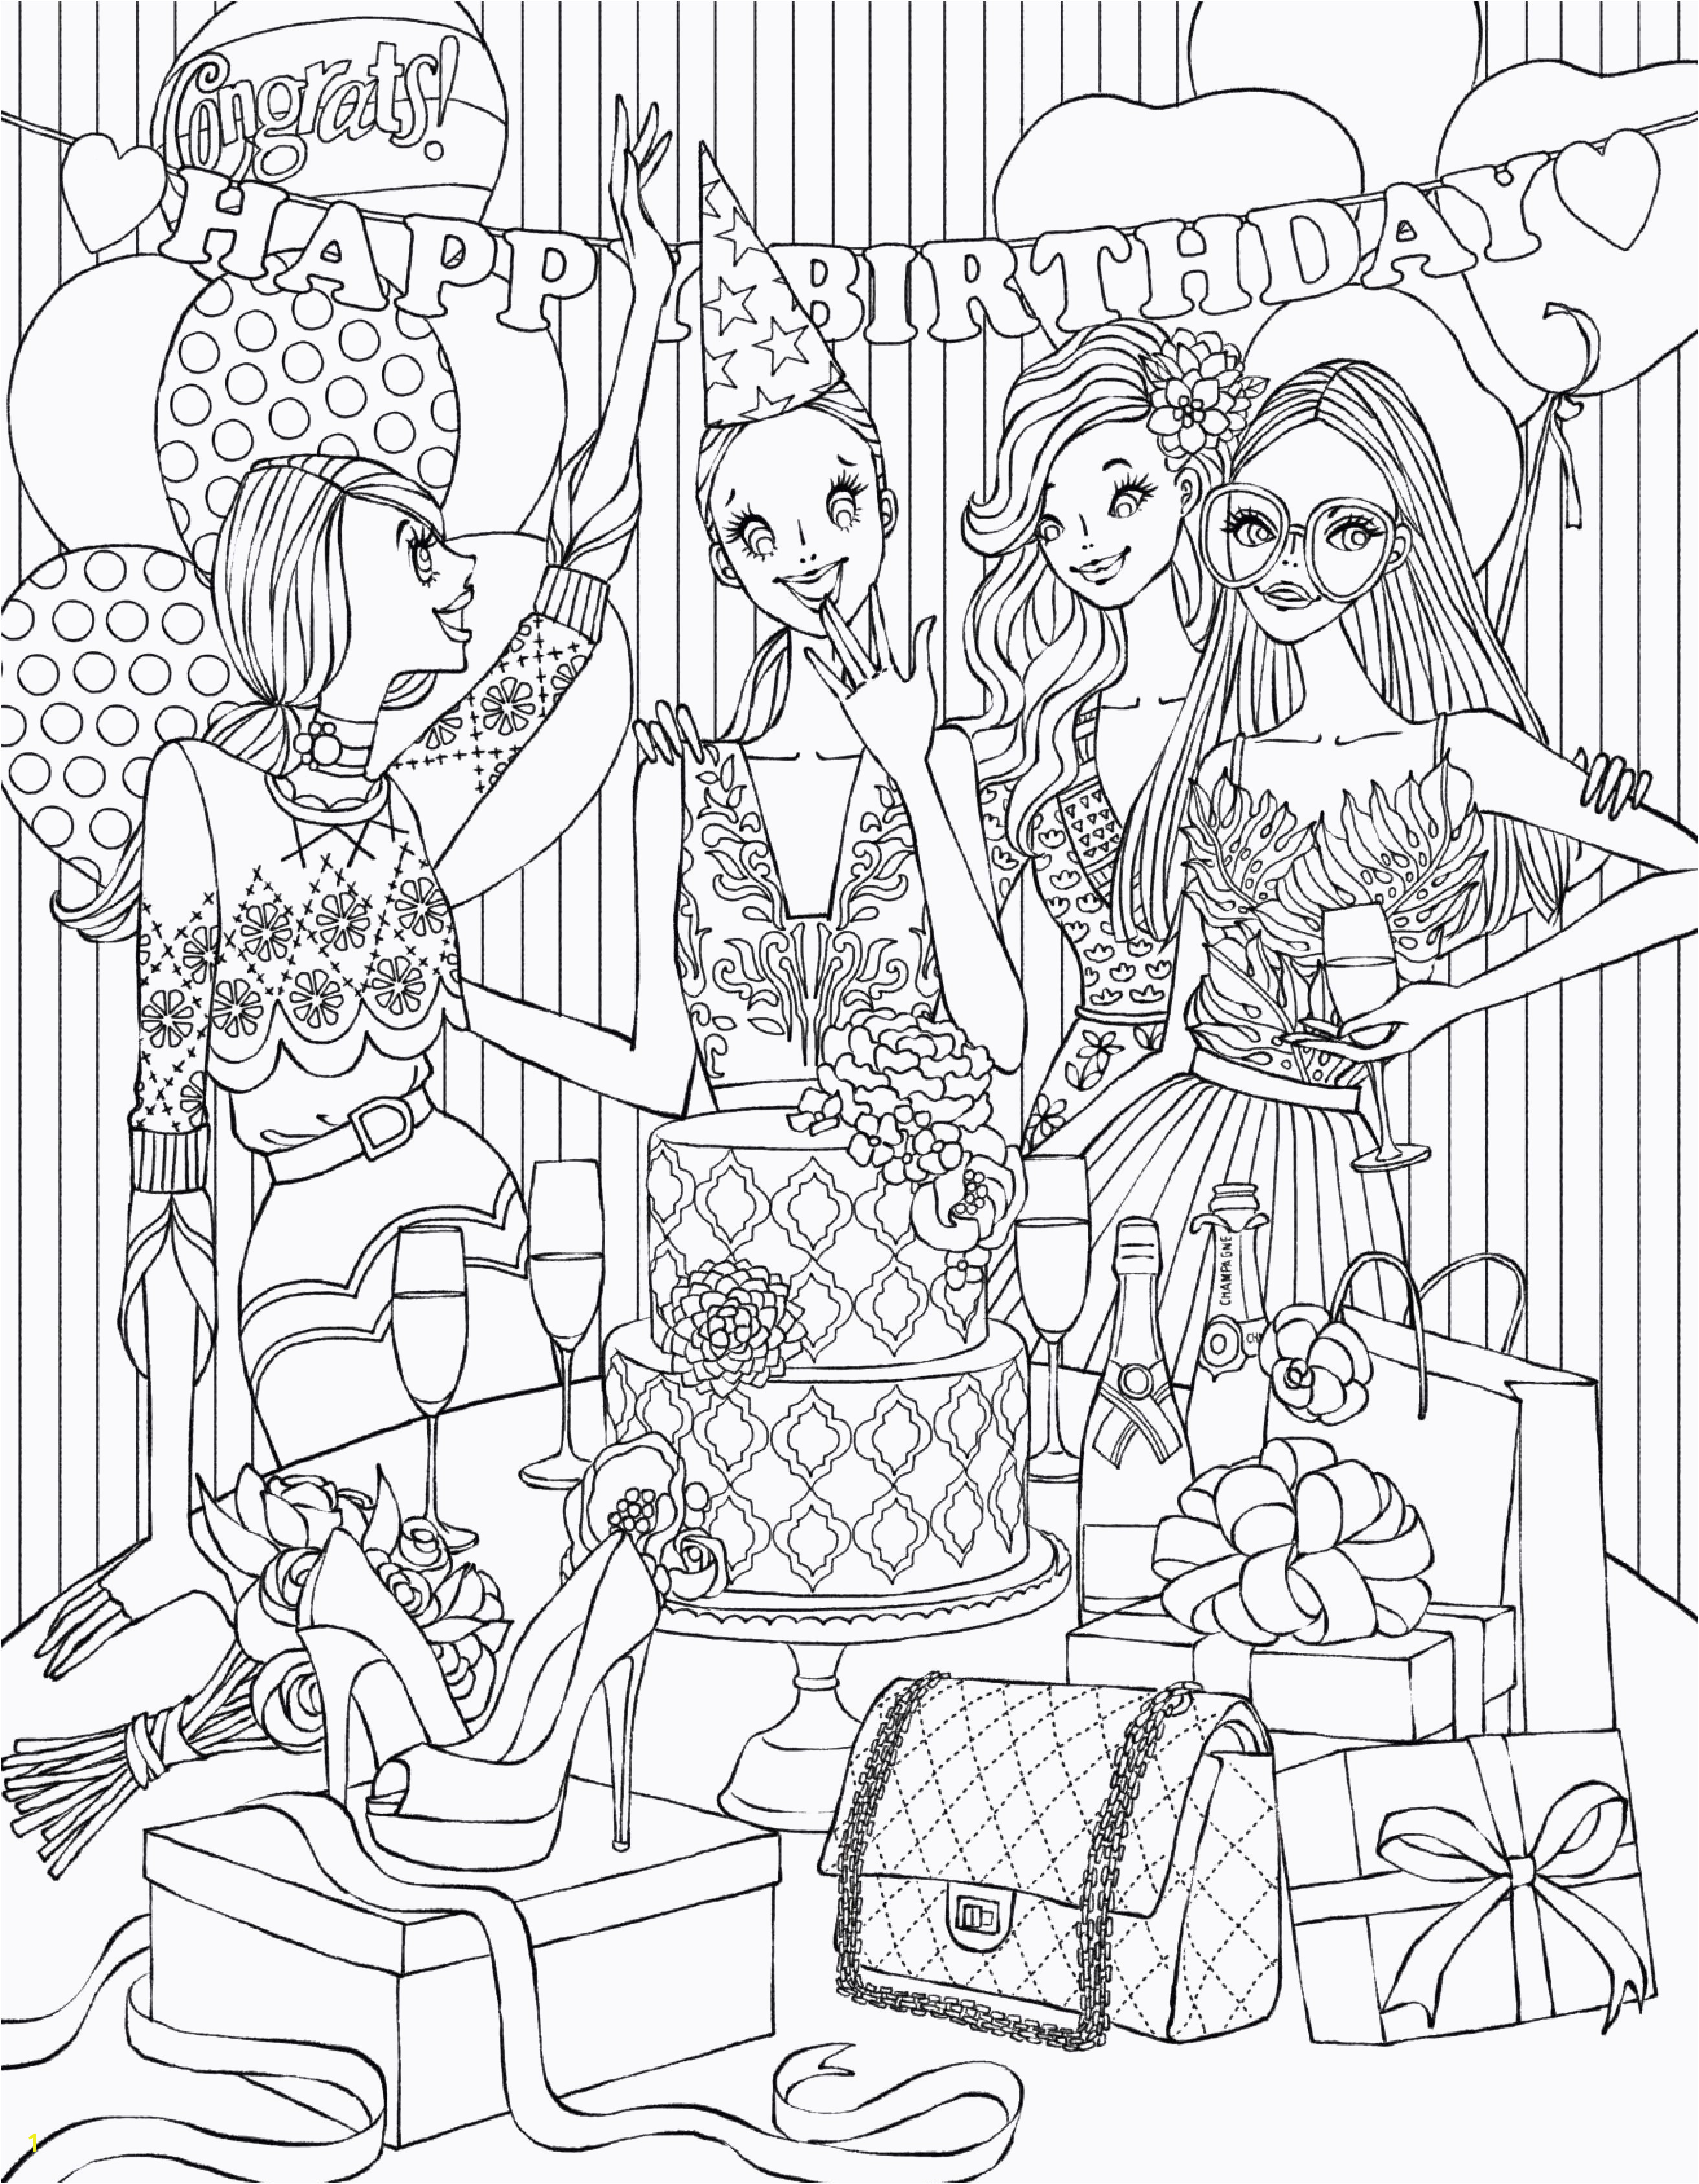 Free Printable Holiday Coloring Pages Holiday Coloring Book Beautiful Printable Coloring Book 0d Archives